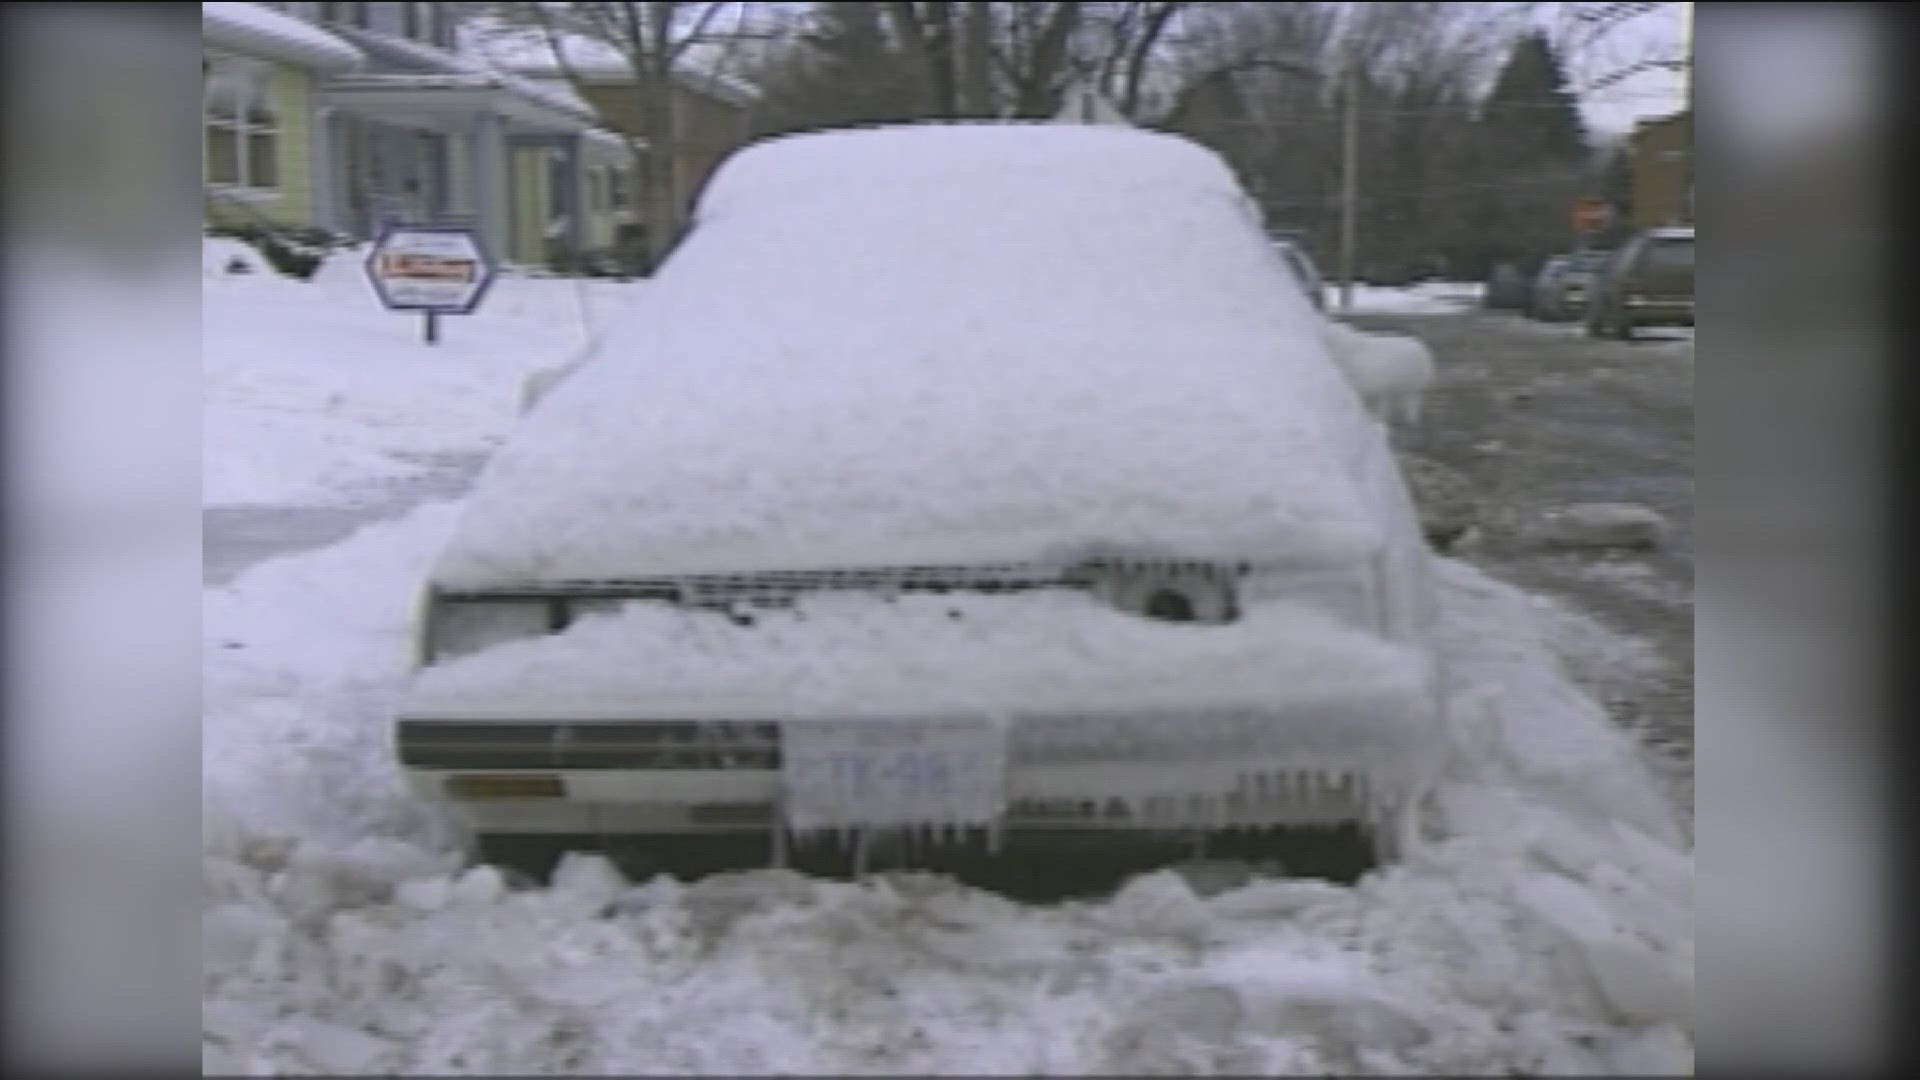 In January, 1994, temperatures dipped to all-time record lows.